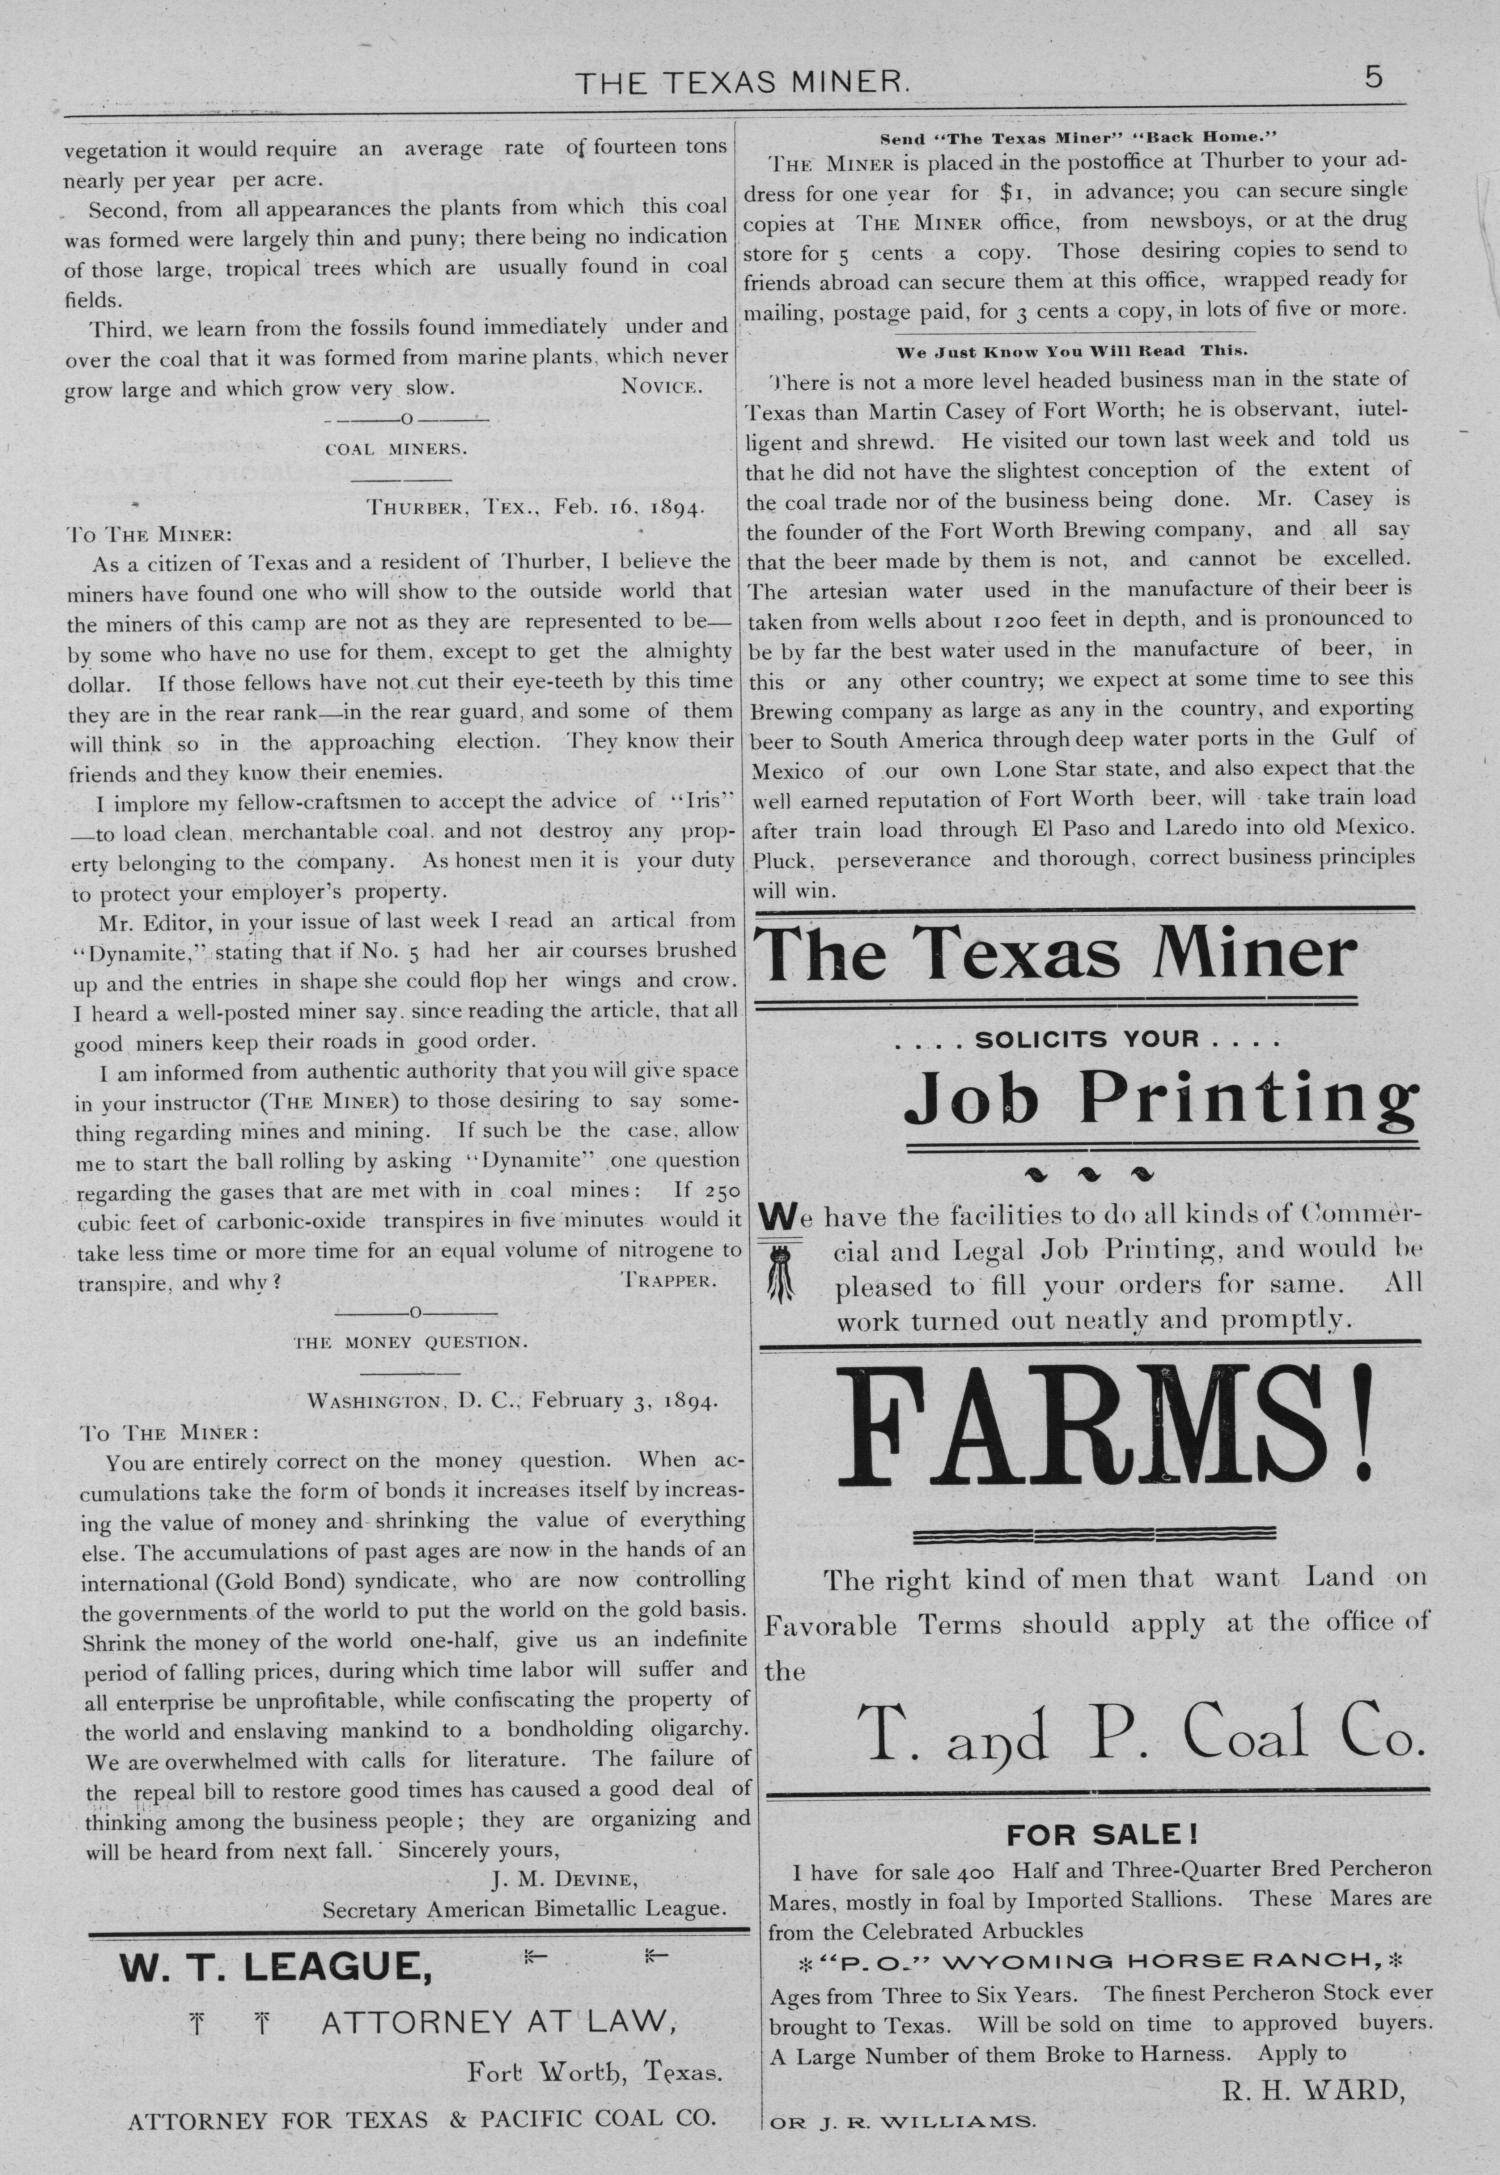 The Texas Miner, Volume 1, Number 5, February 17, 1894
                                                
                                                    5
                                                